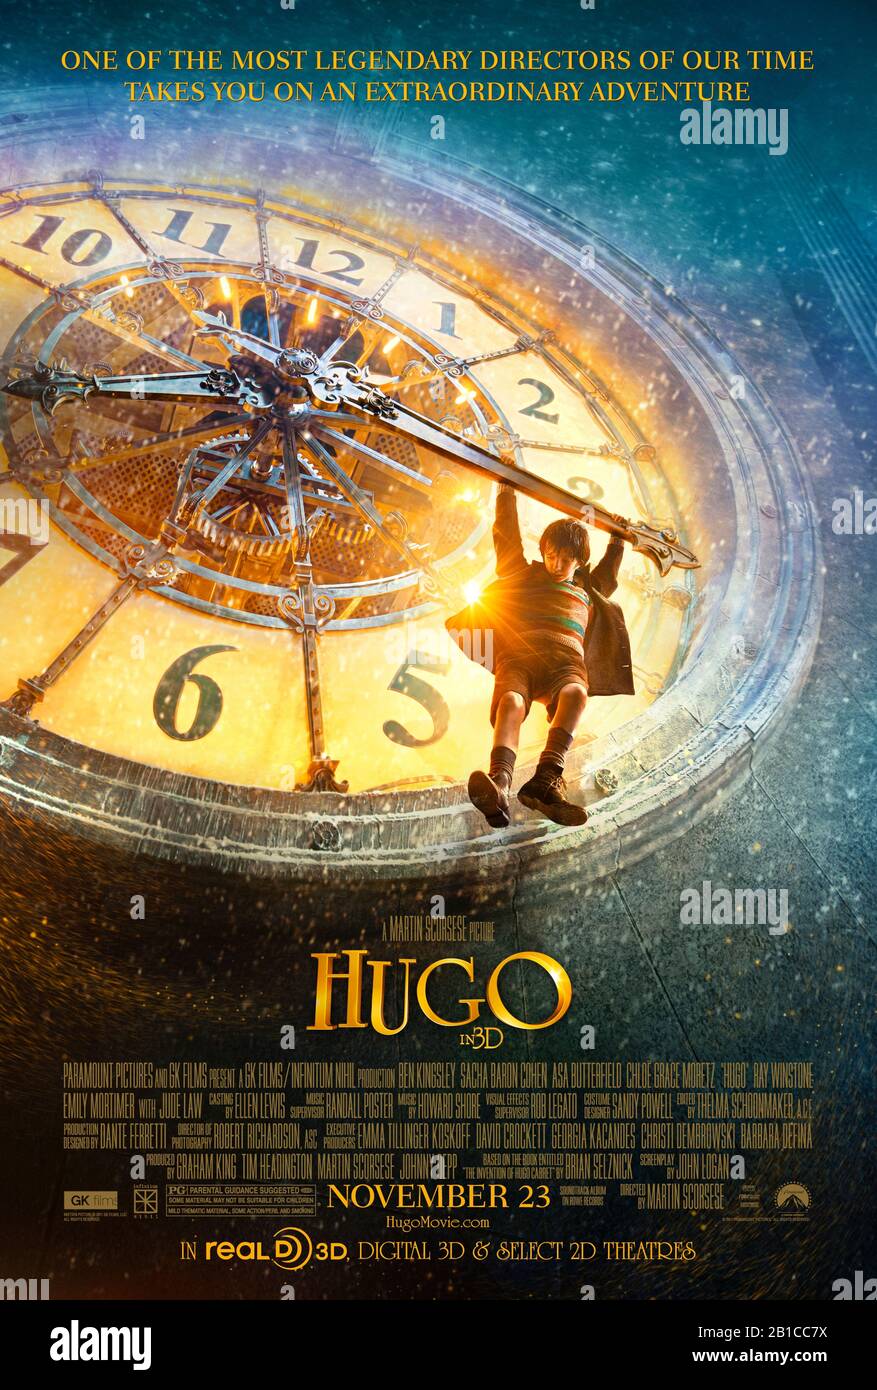 Hugo (2011) directed by Martin Scorsese and starring Asa Butterfield, Chloë Grace Moretz, Christopher Lee and Sacha Baron Cohen. An orphan boy living in the Gare Montparnasse train station in Paris in the 1930s rescues an automaton his father once repaired and tries to restore it. Stock Photo